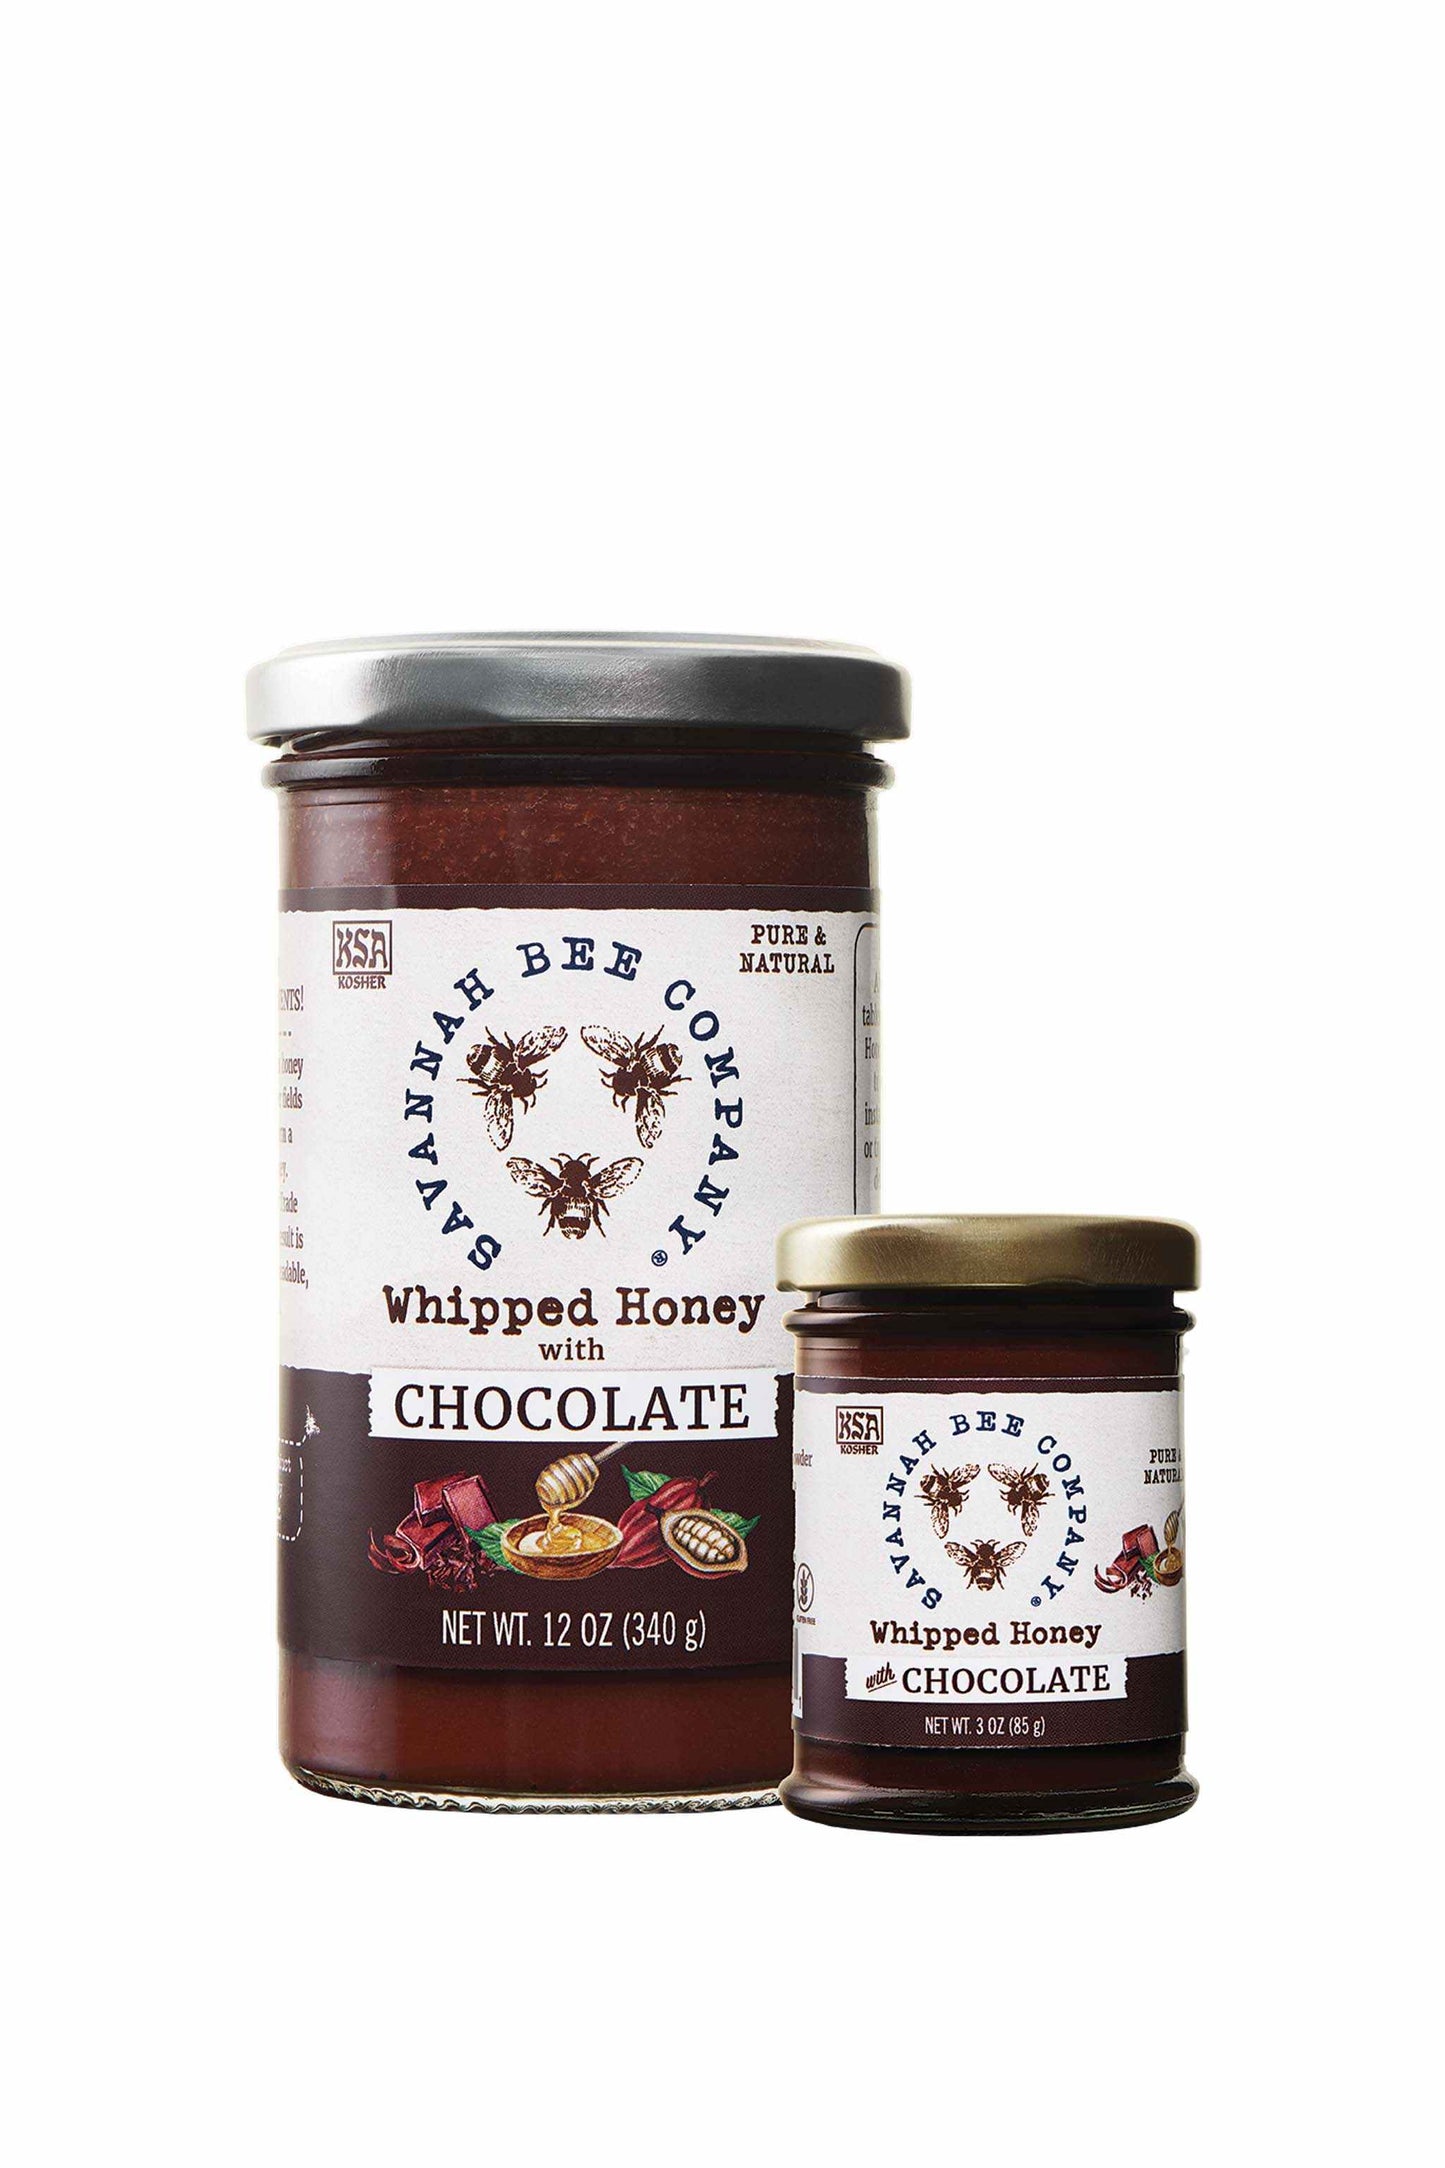 Whipped Honey with Chocolate 12 oz. and 3 oz. studio shot.